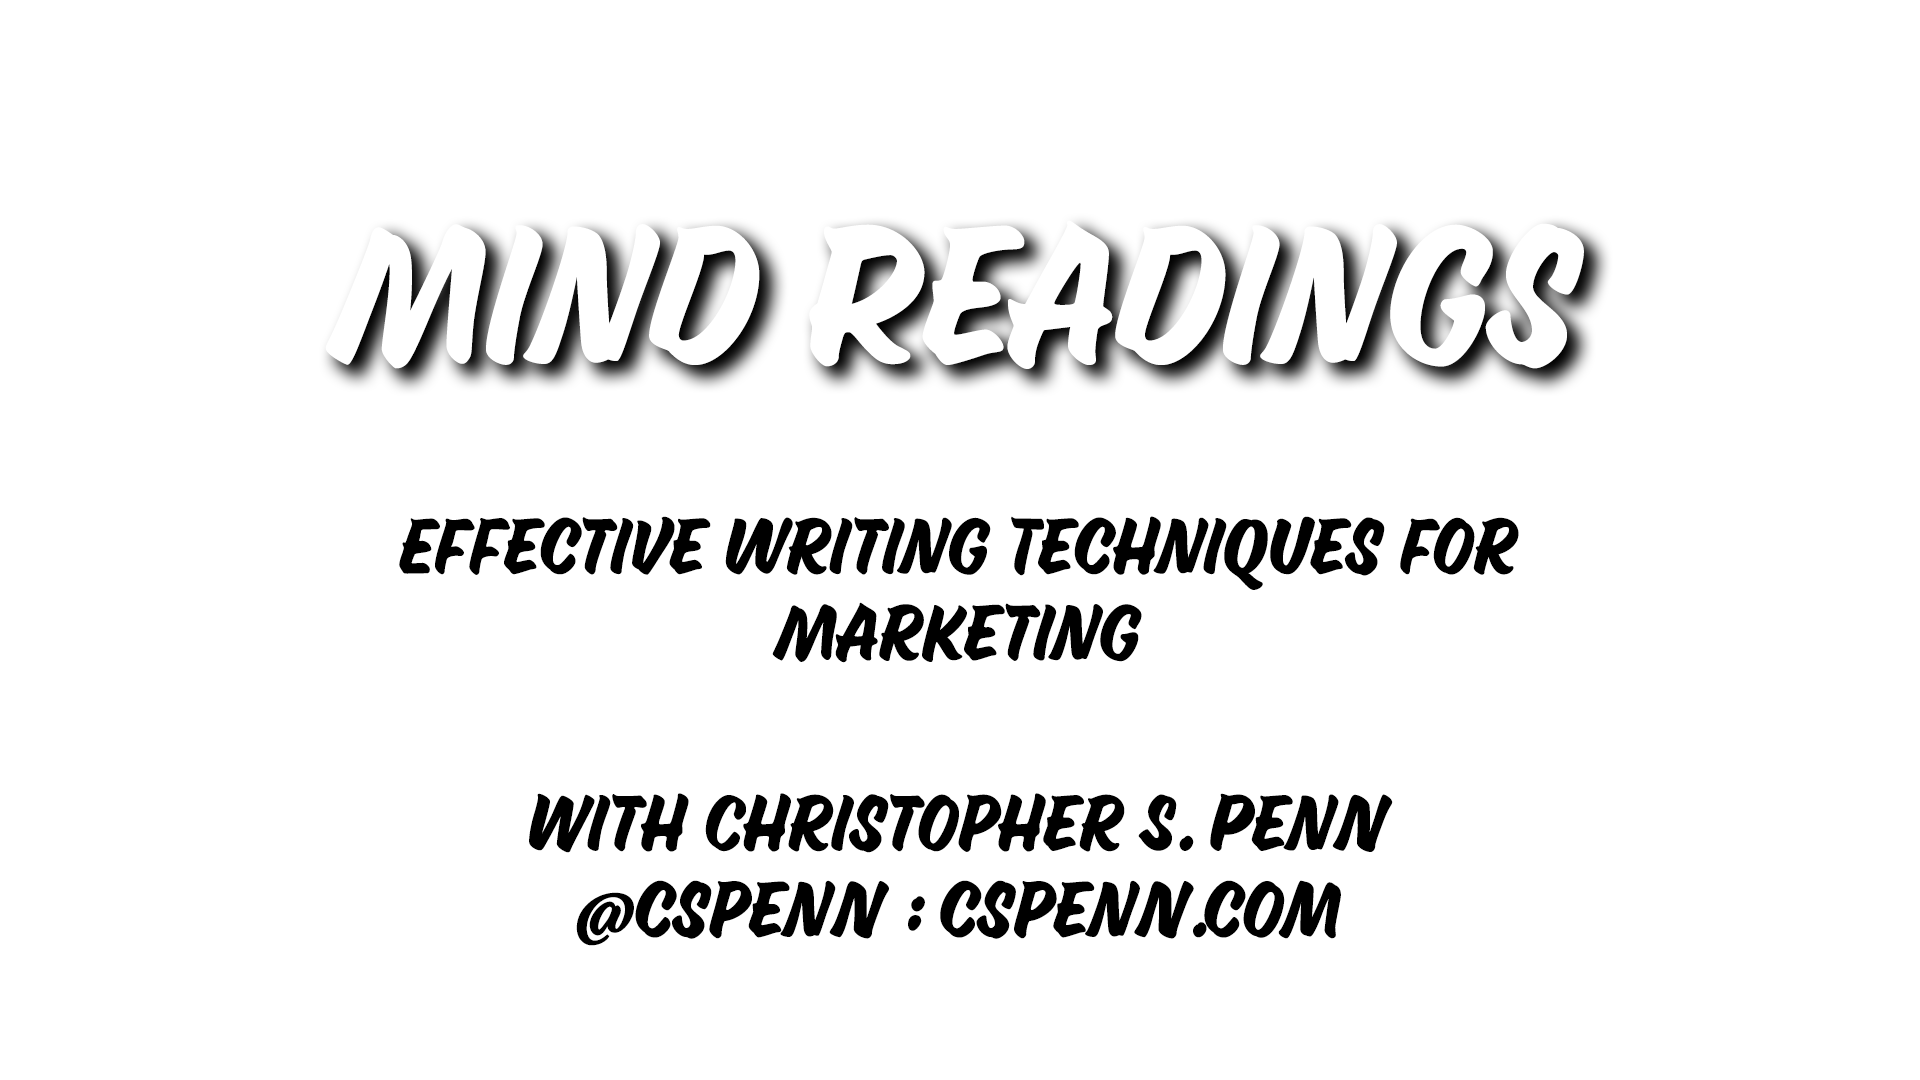 Mind Readings: Effective Writing Techniques for Marketing